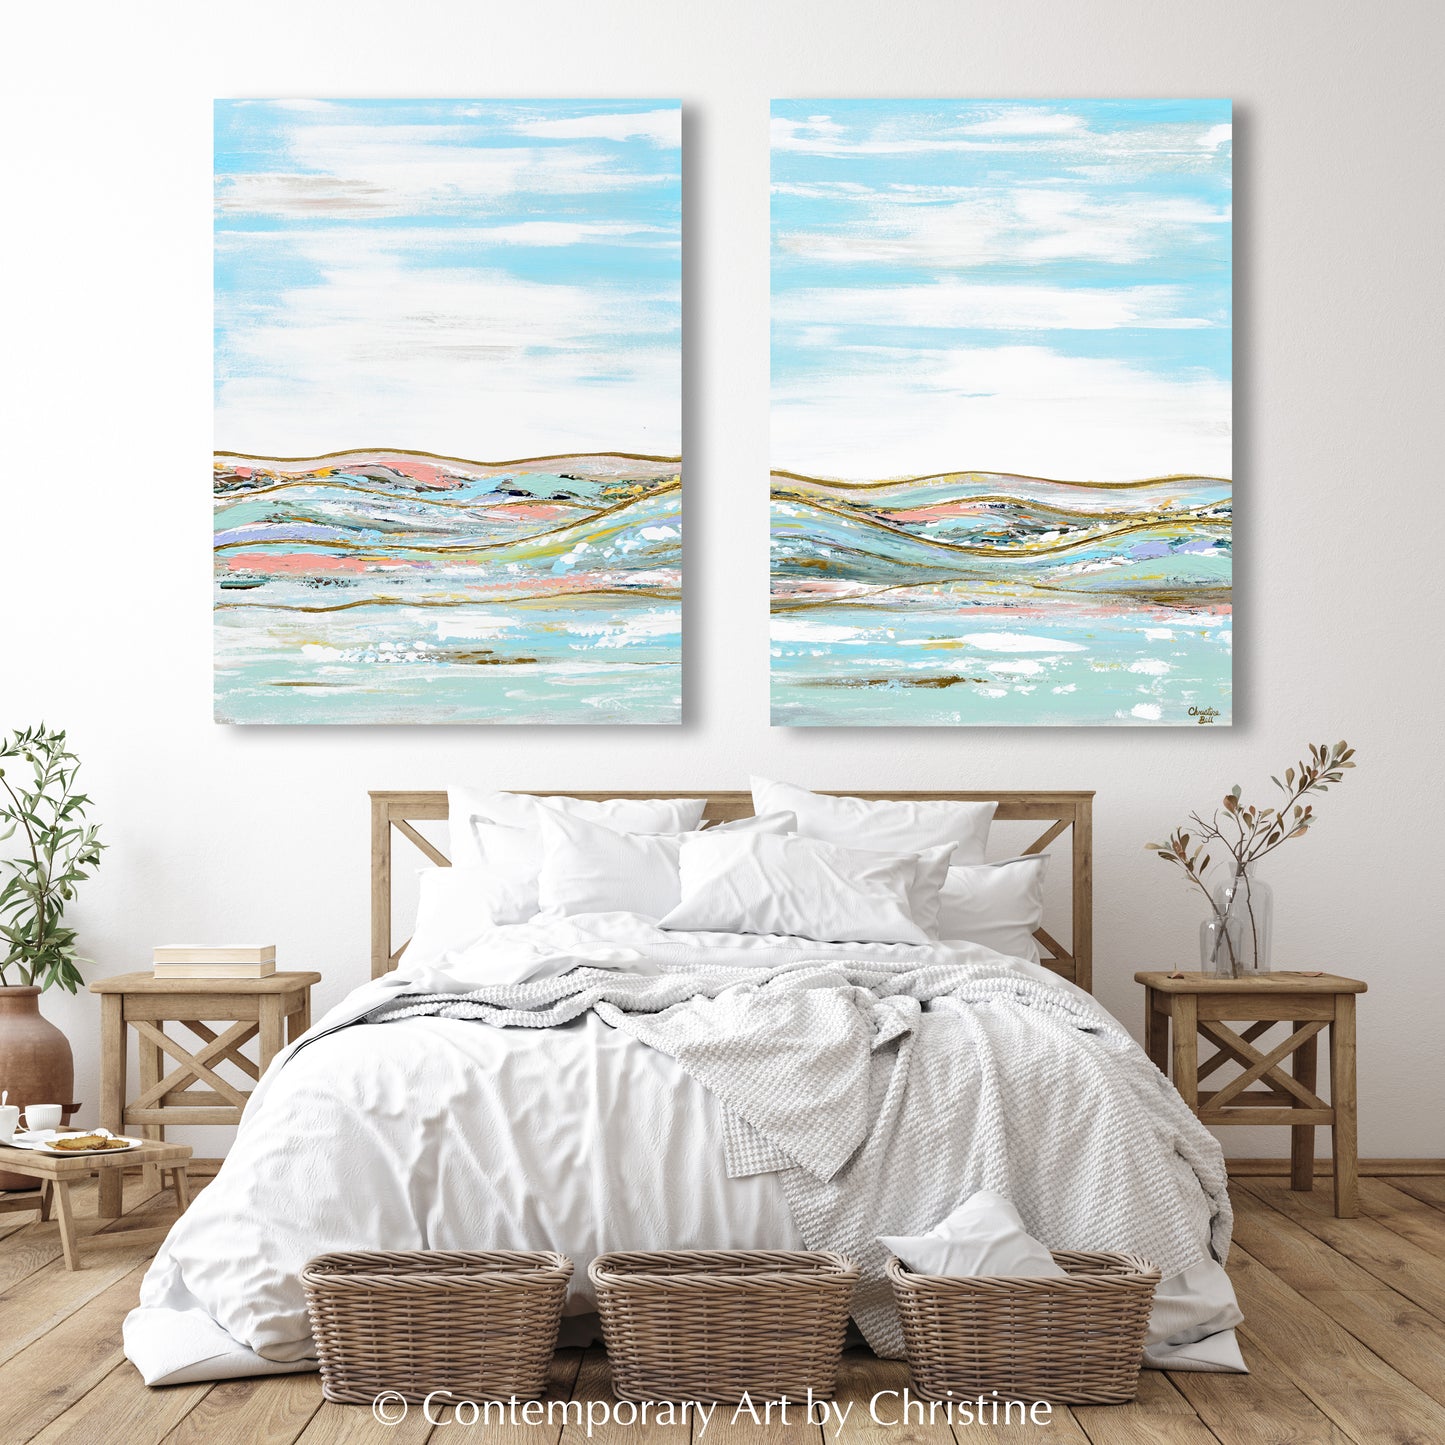 "Heavenly Day I" GICLEE PRINT Art Abstract Landscape Painting Diptych, Light Blue, Mint, Gold Expressionist Palette Knife